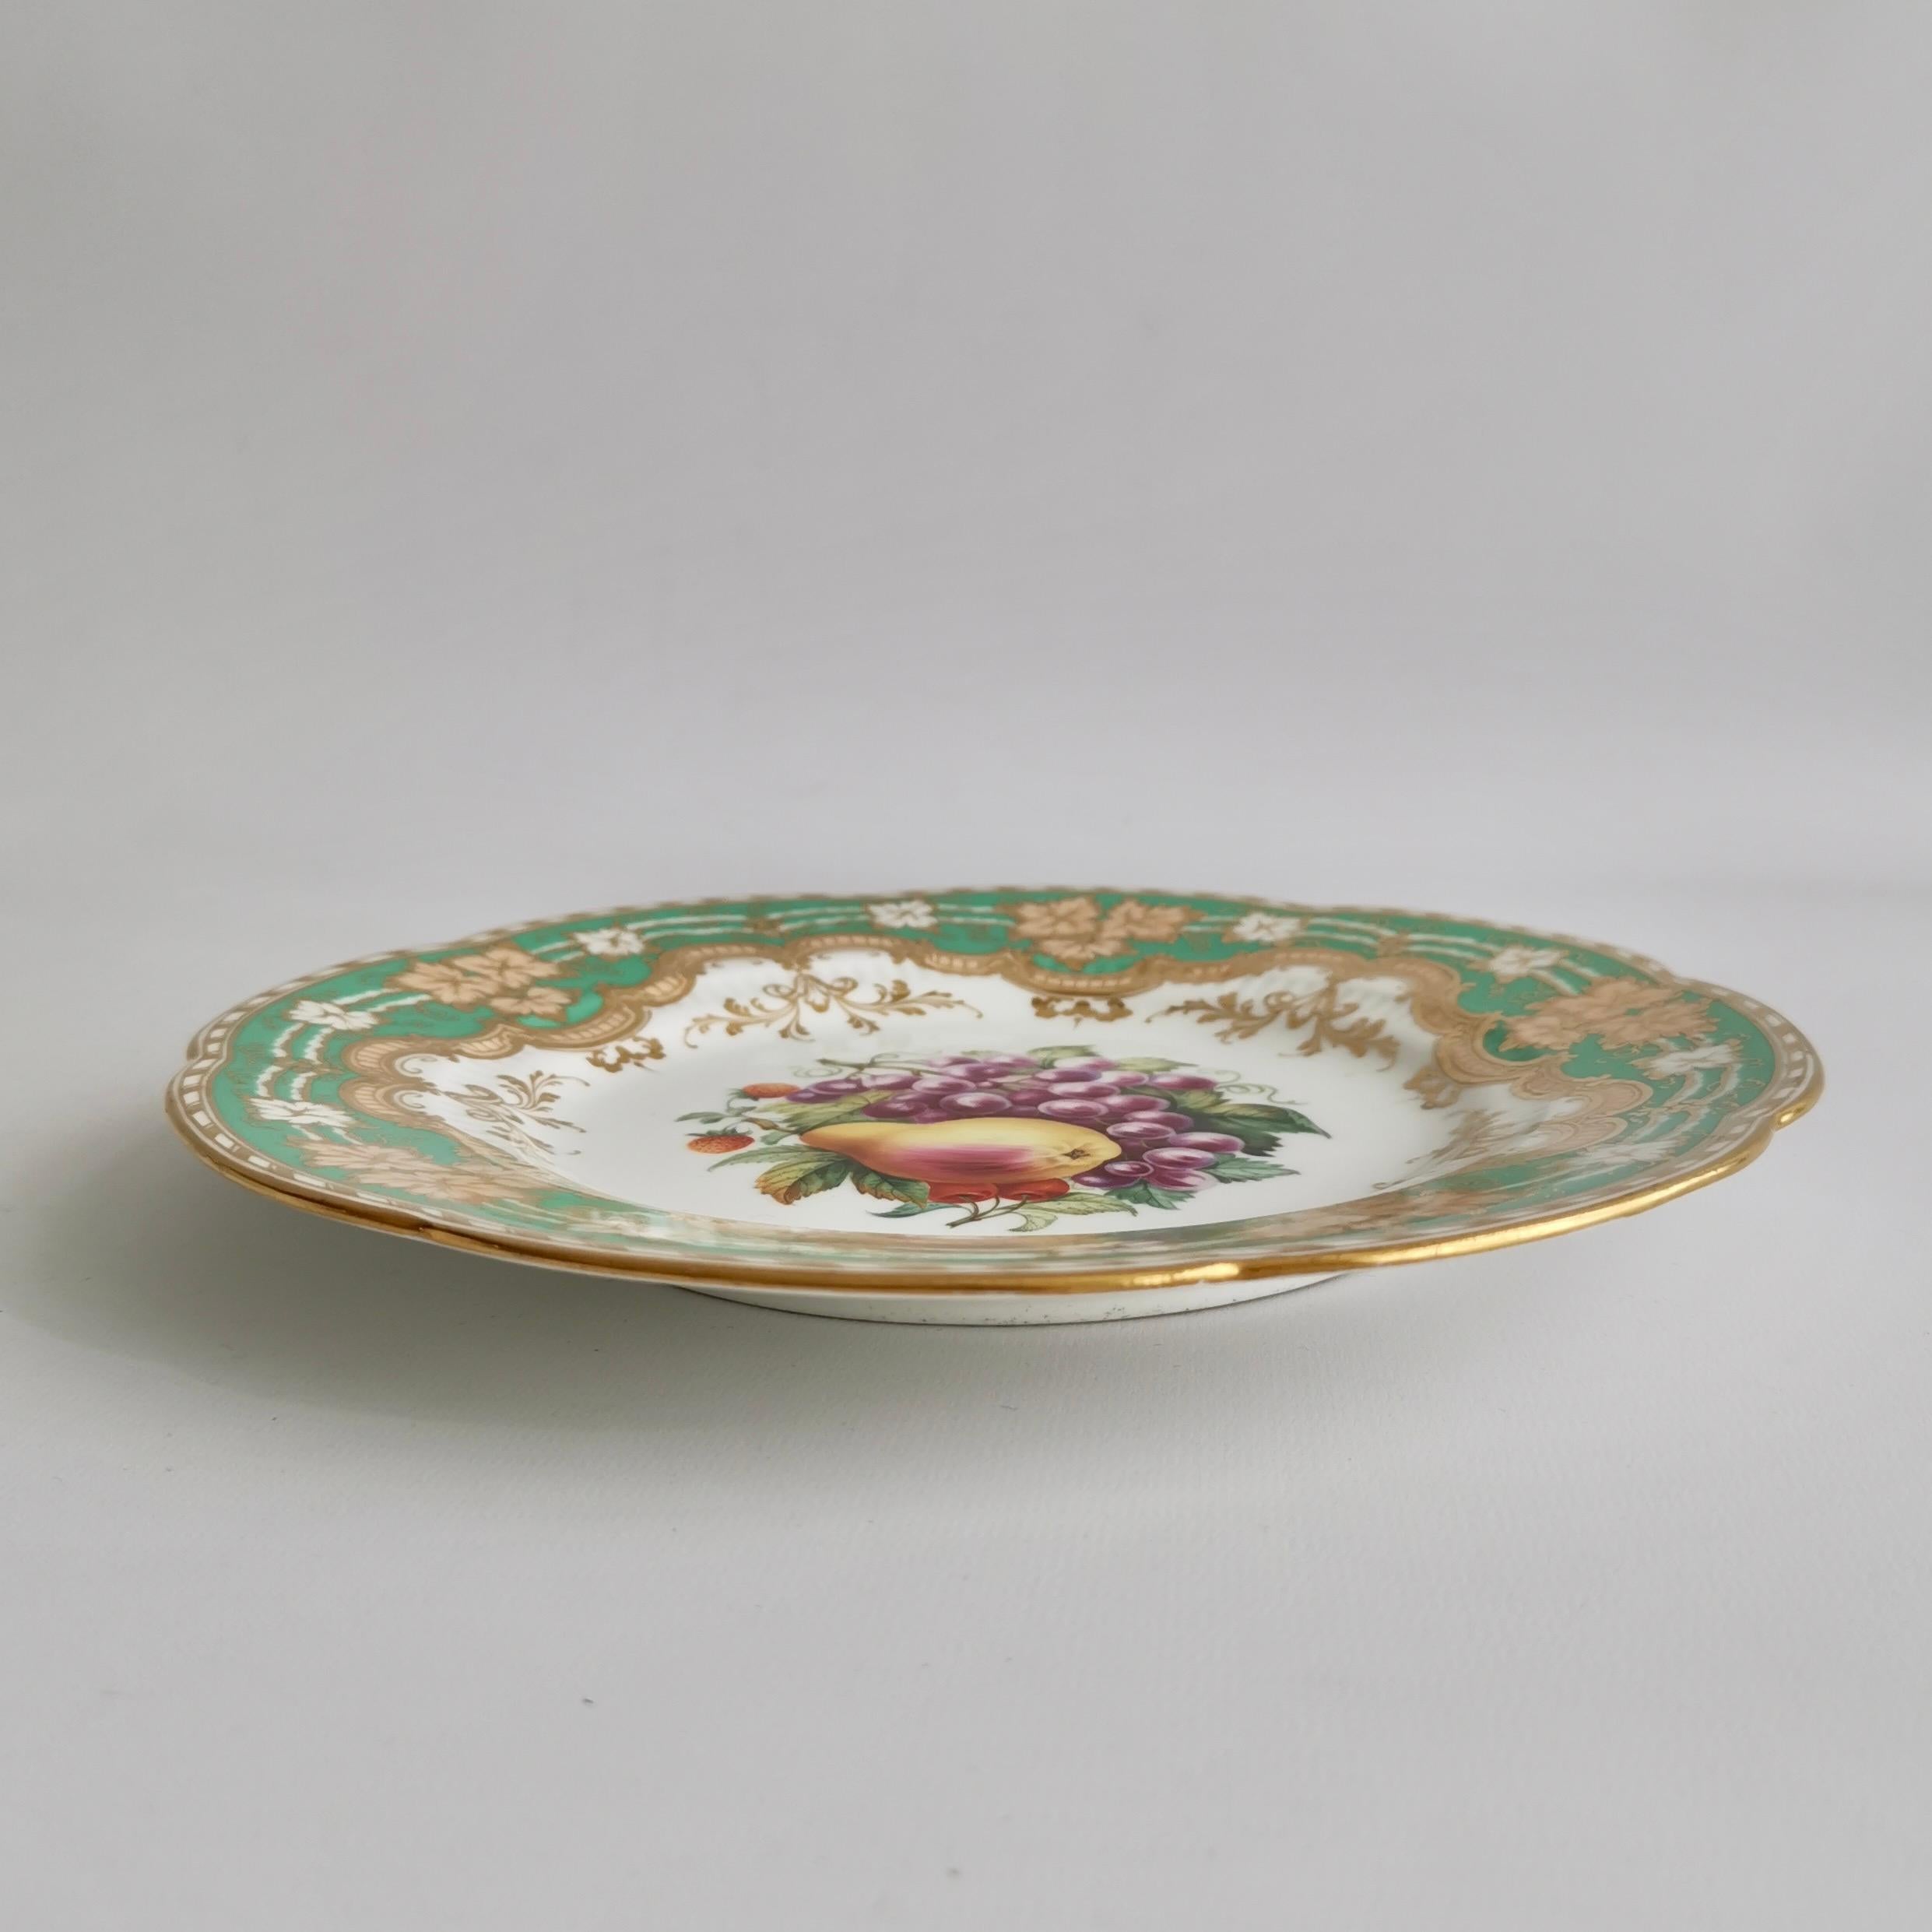 Ridgway Plate, Emerald Green, Gilt and Sublime Hand Painted Fruits, ca 1853 3